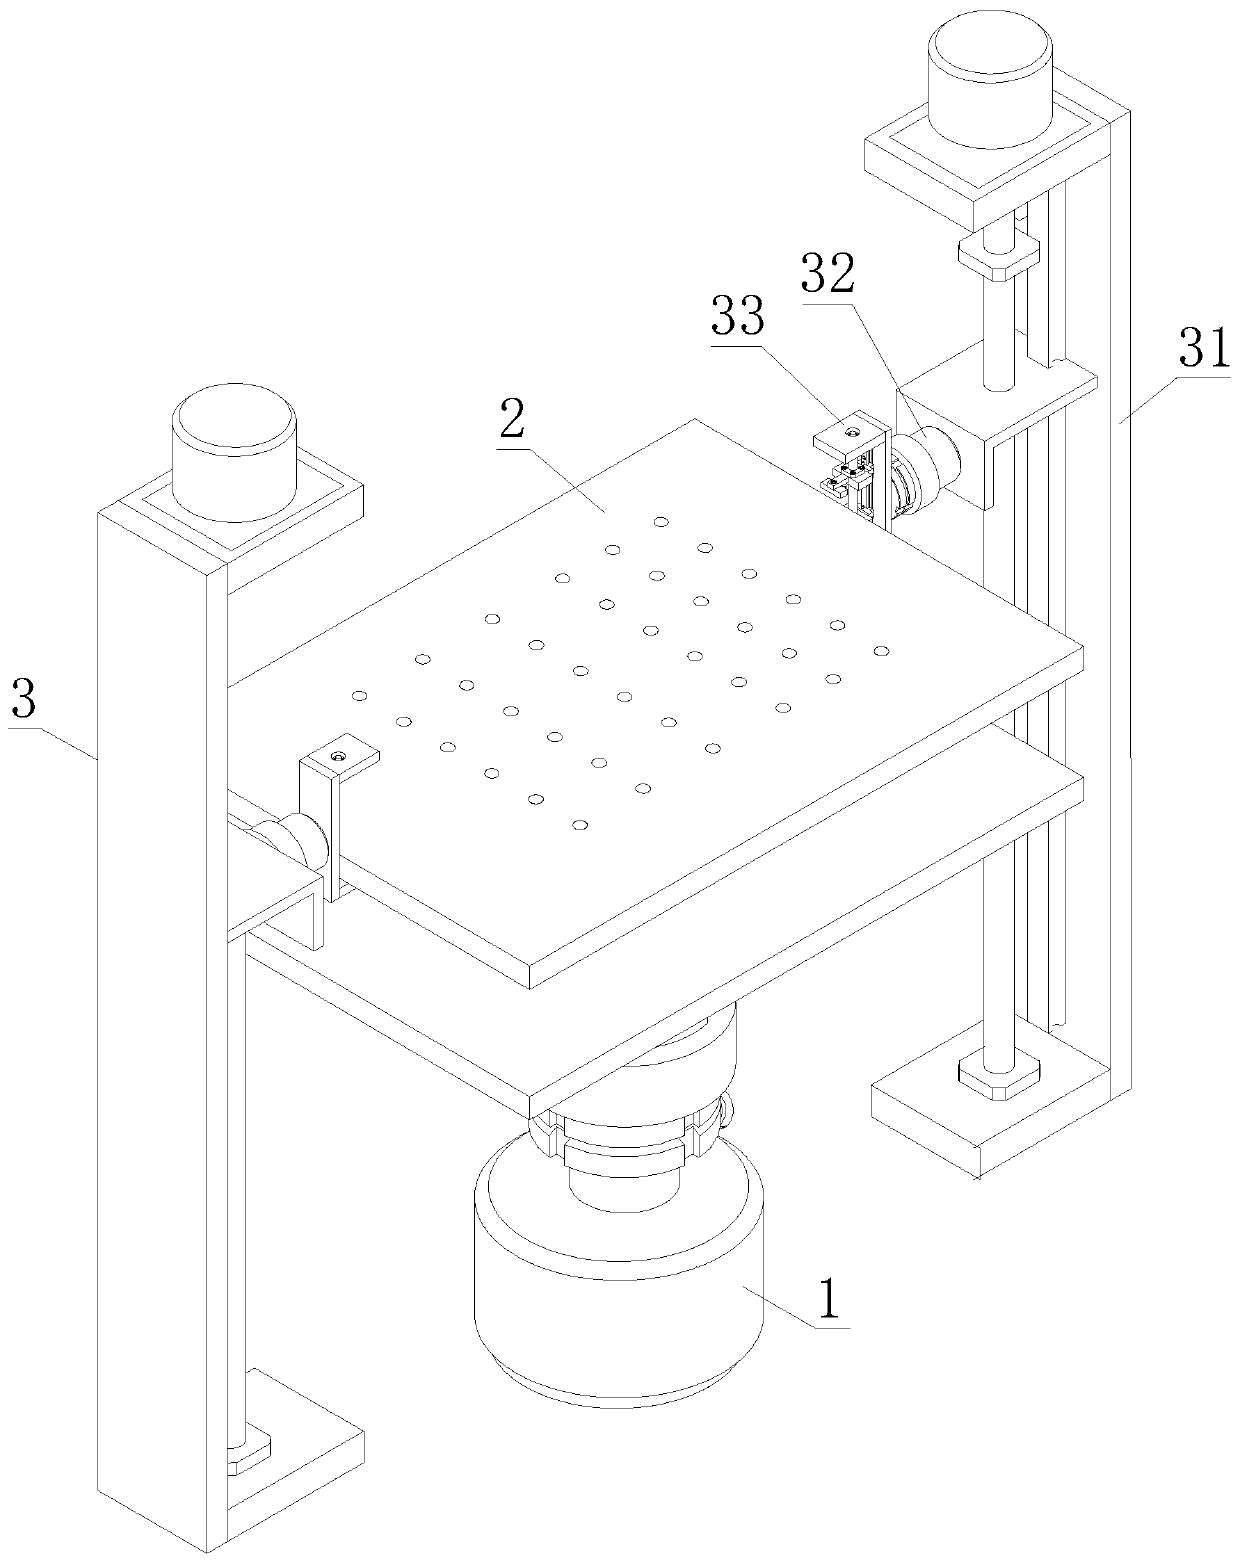 Workbench and method for automatically overturning welding jig